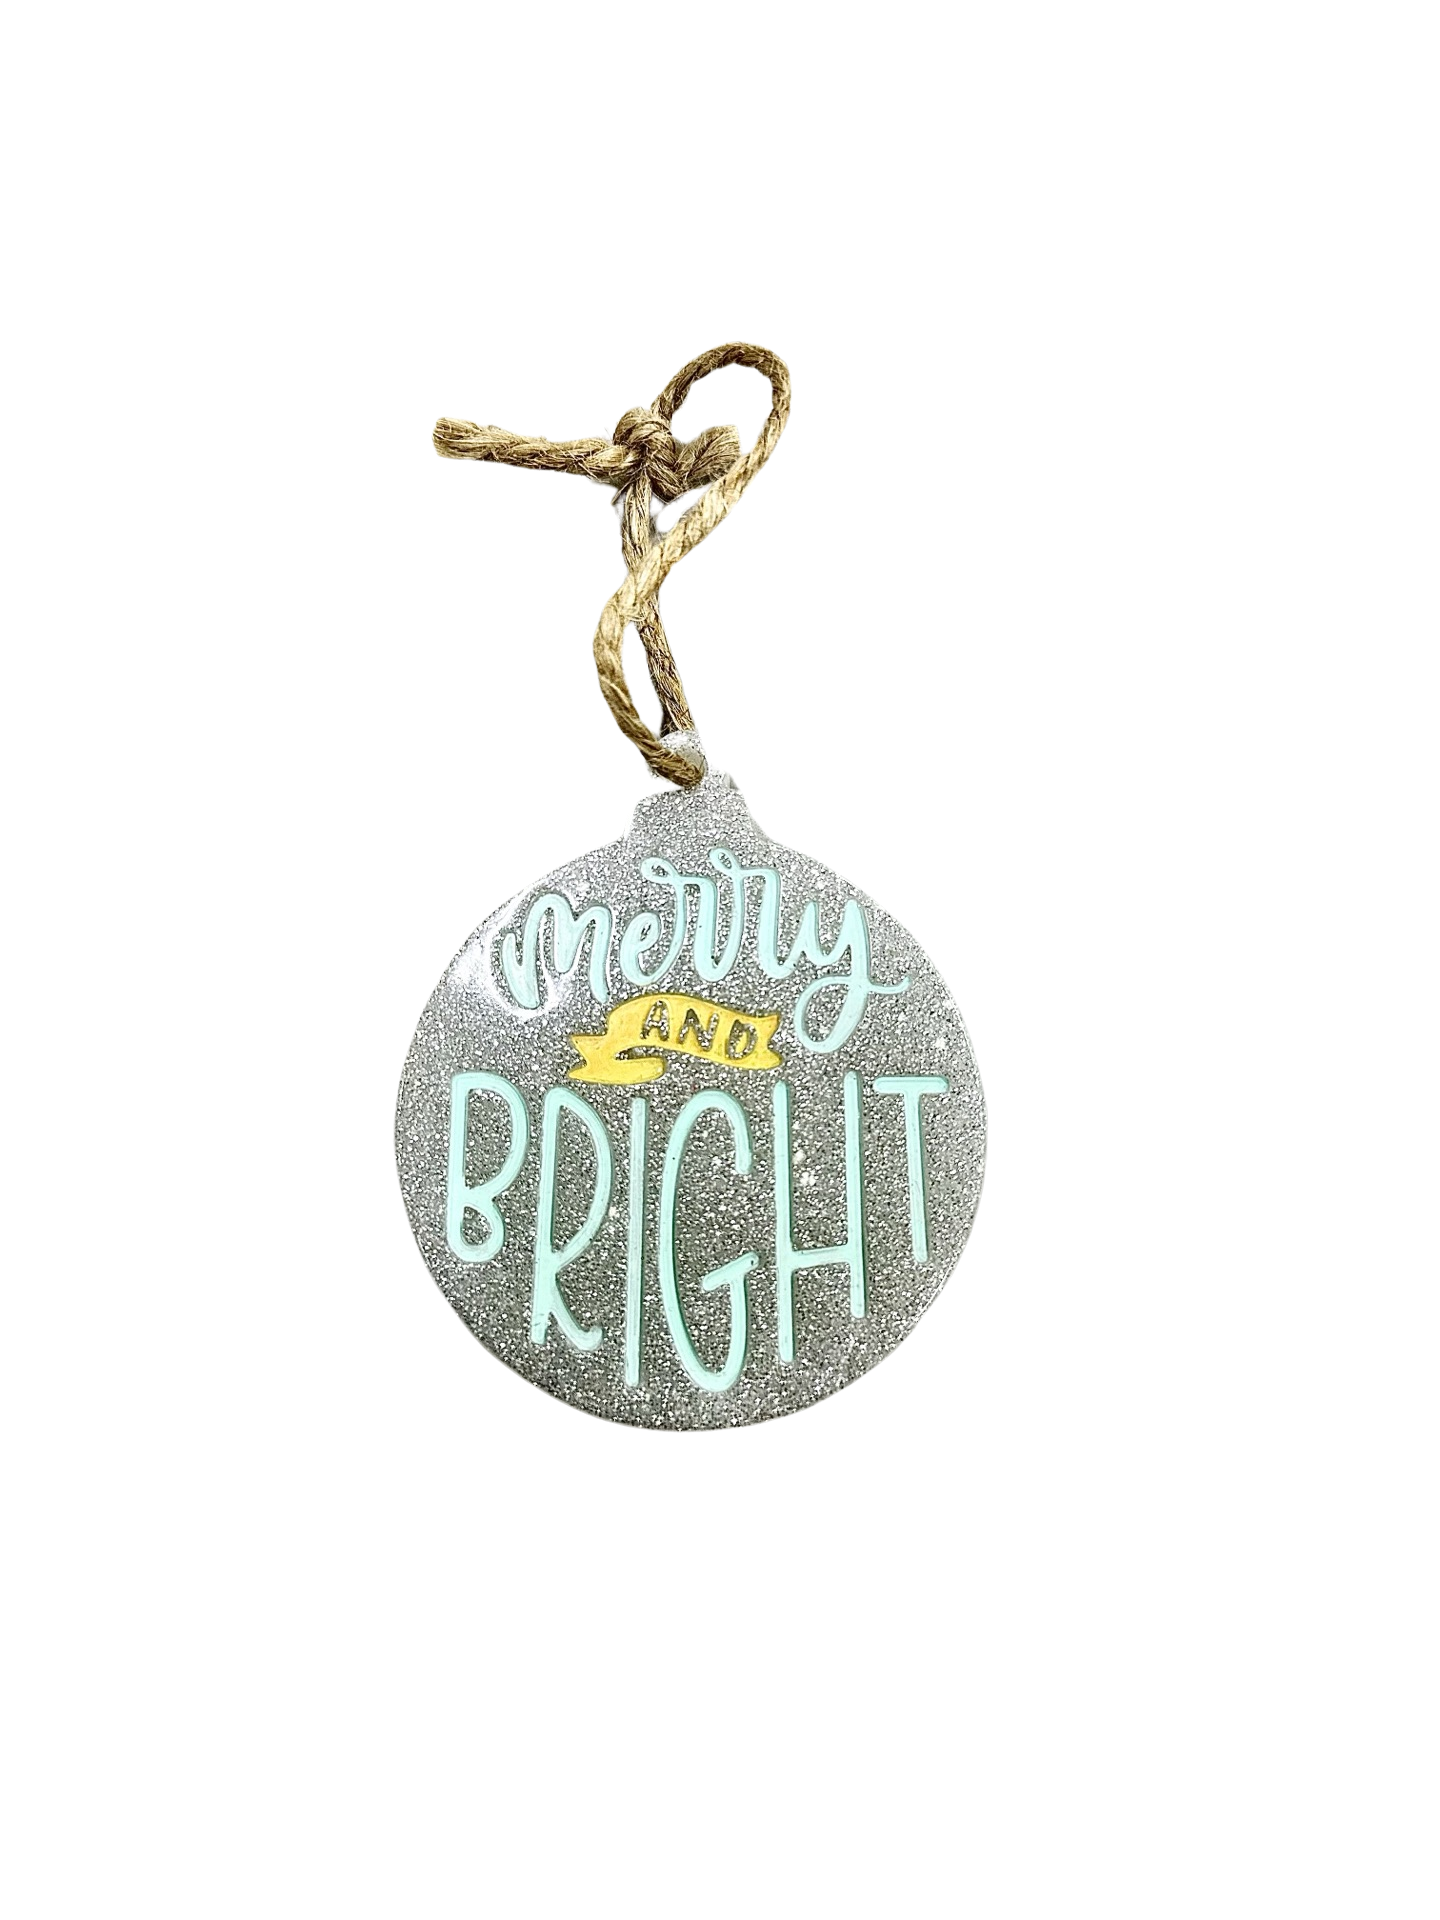 Merry and Bright Christmas Ornament